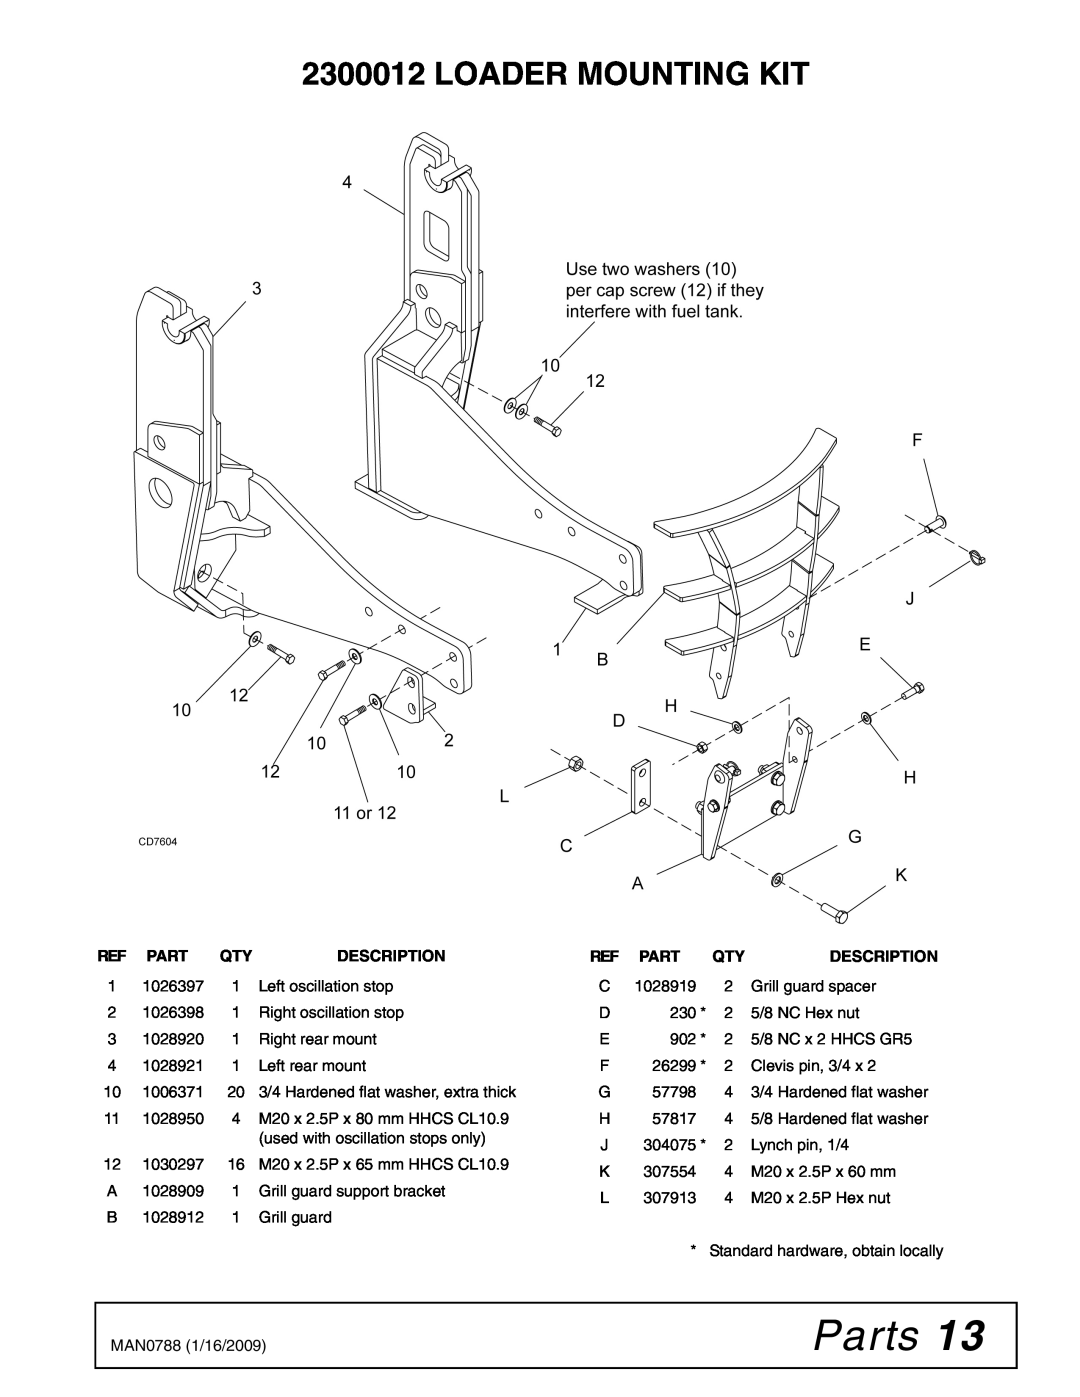 Woods Equipment T5060, T5070, T5040, T5050 installation manual Parts, Loader Mounting Kit, Description 